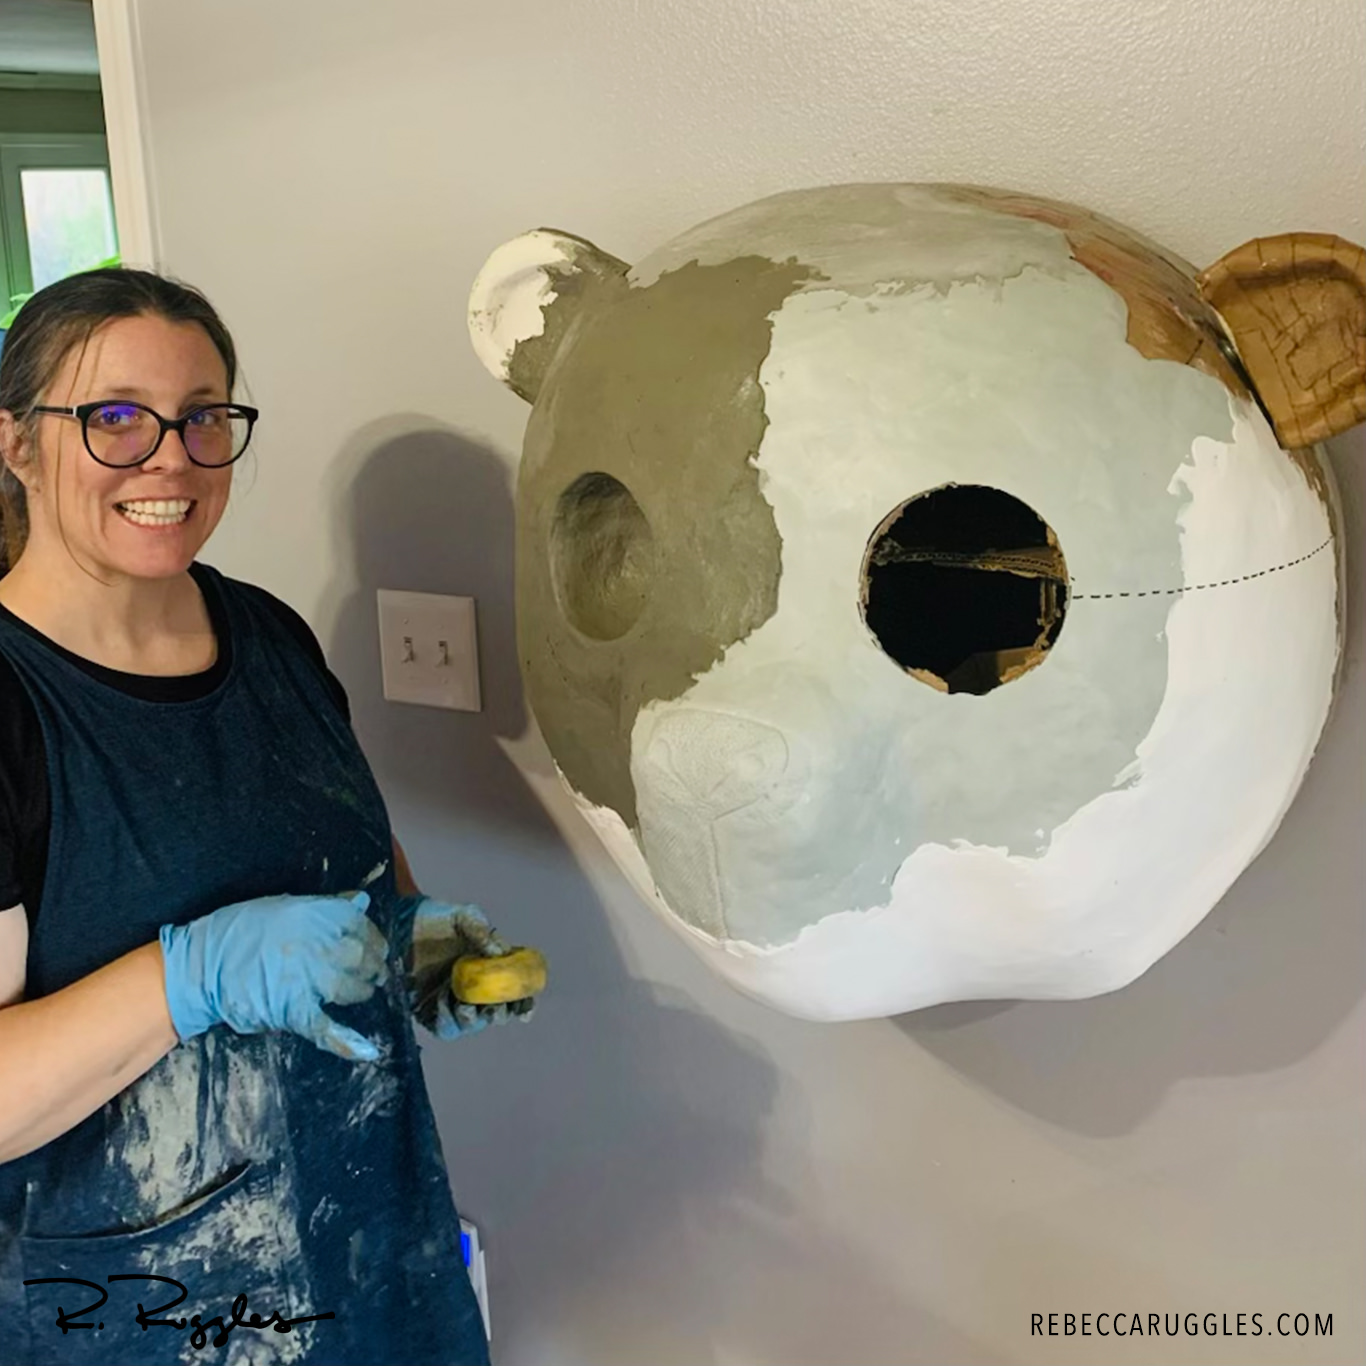 Rebecca Ruggles toweling clay on the panda sculpture.